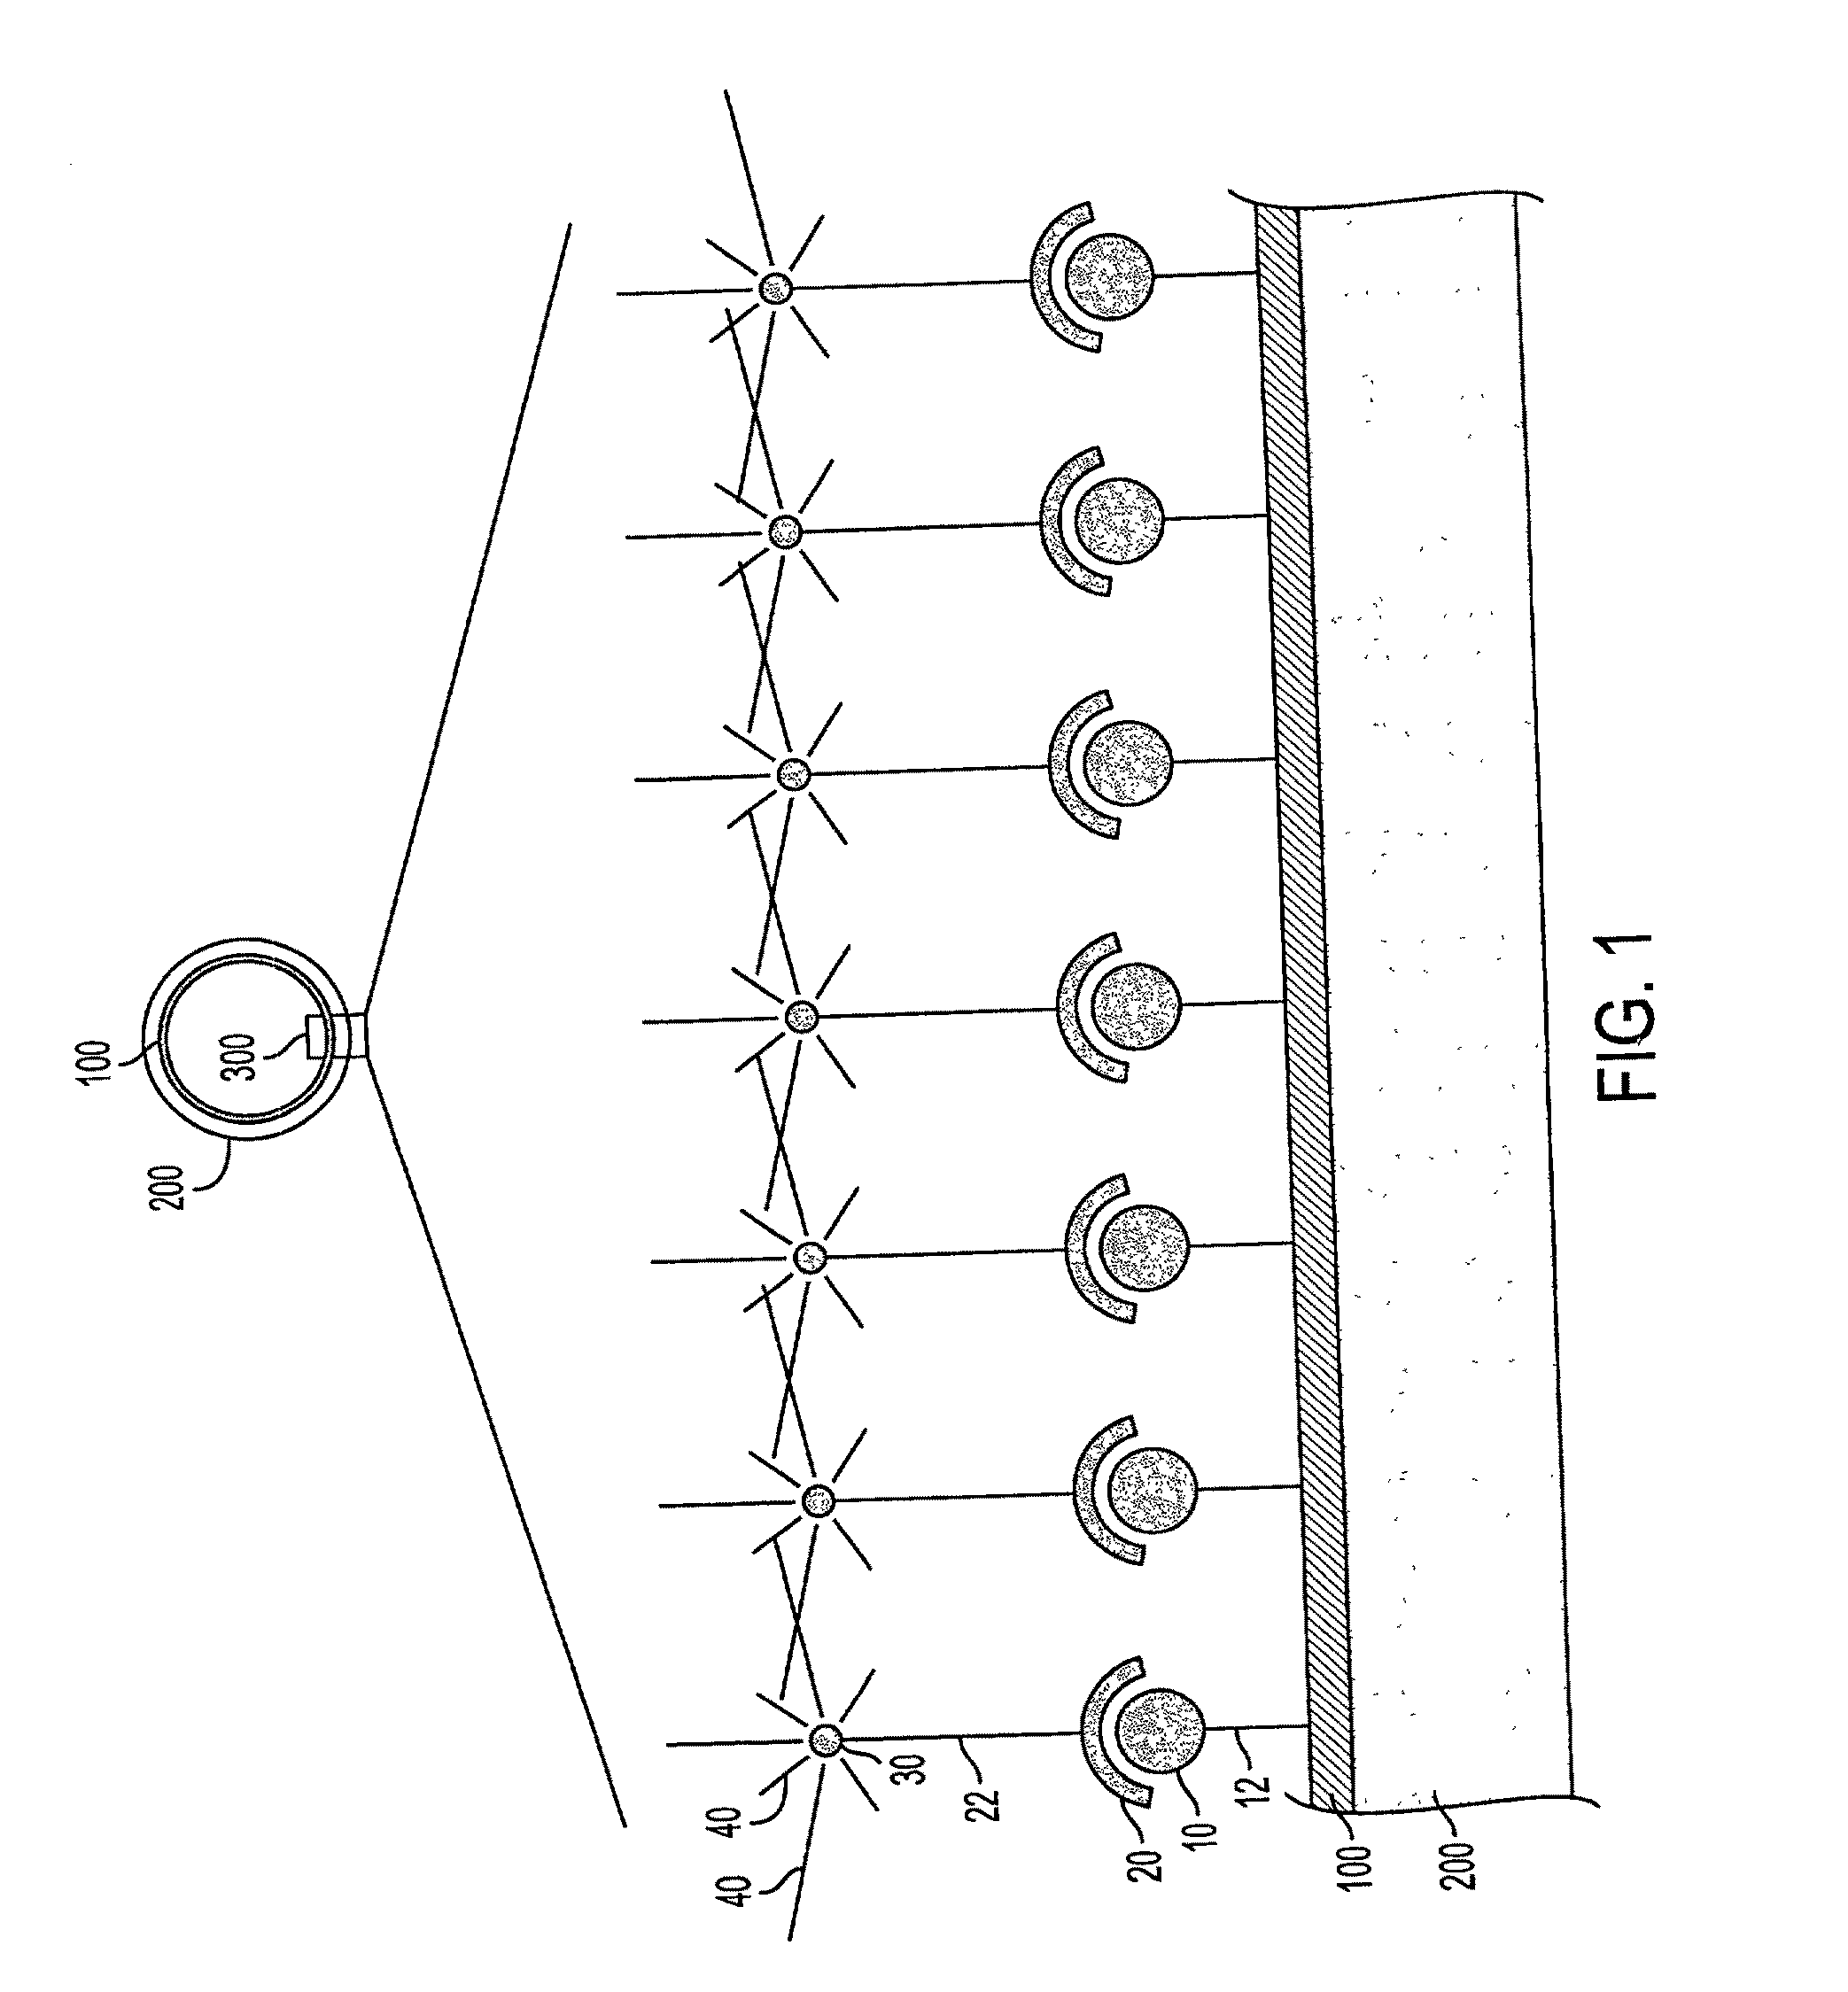 Methods and apparatus for localized administration of inhibitory moieties to a patient